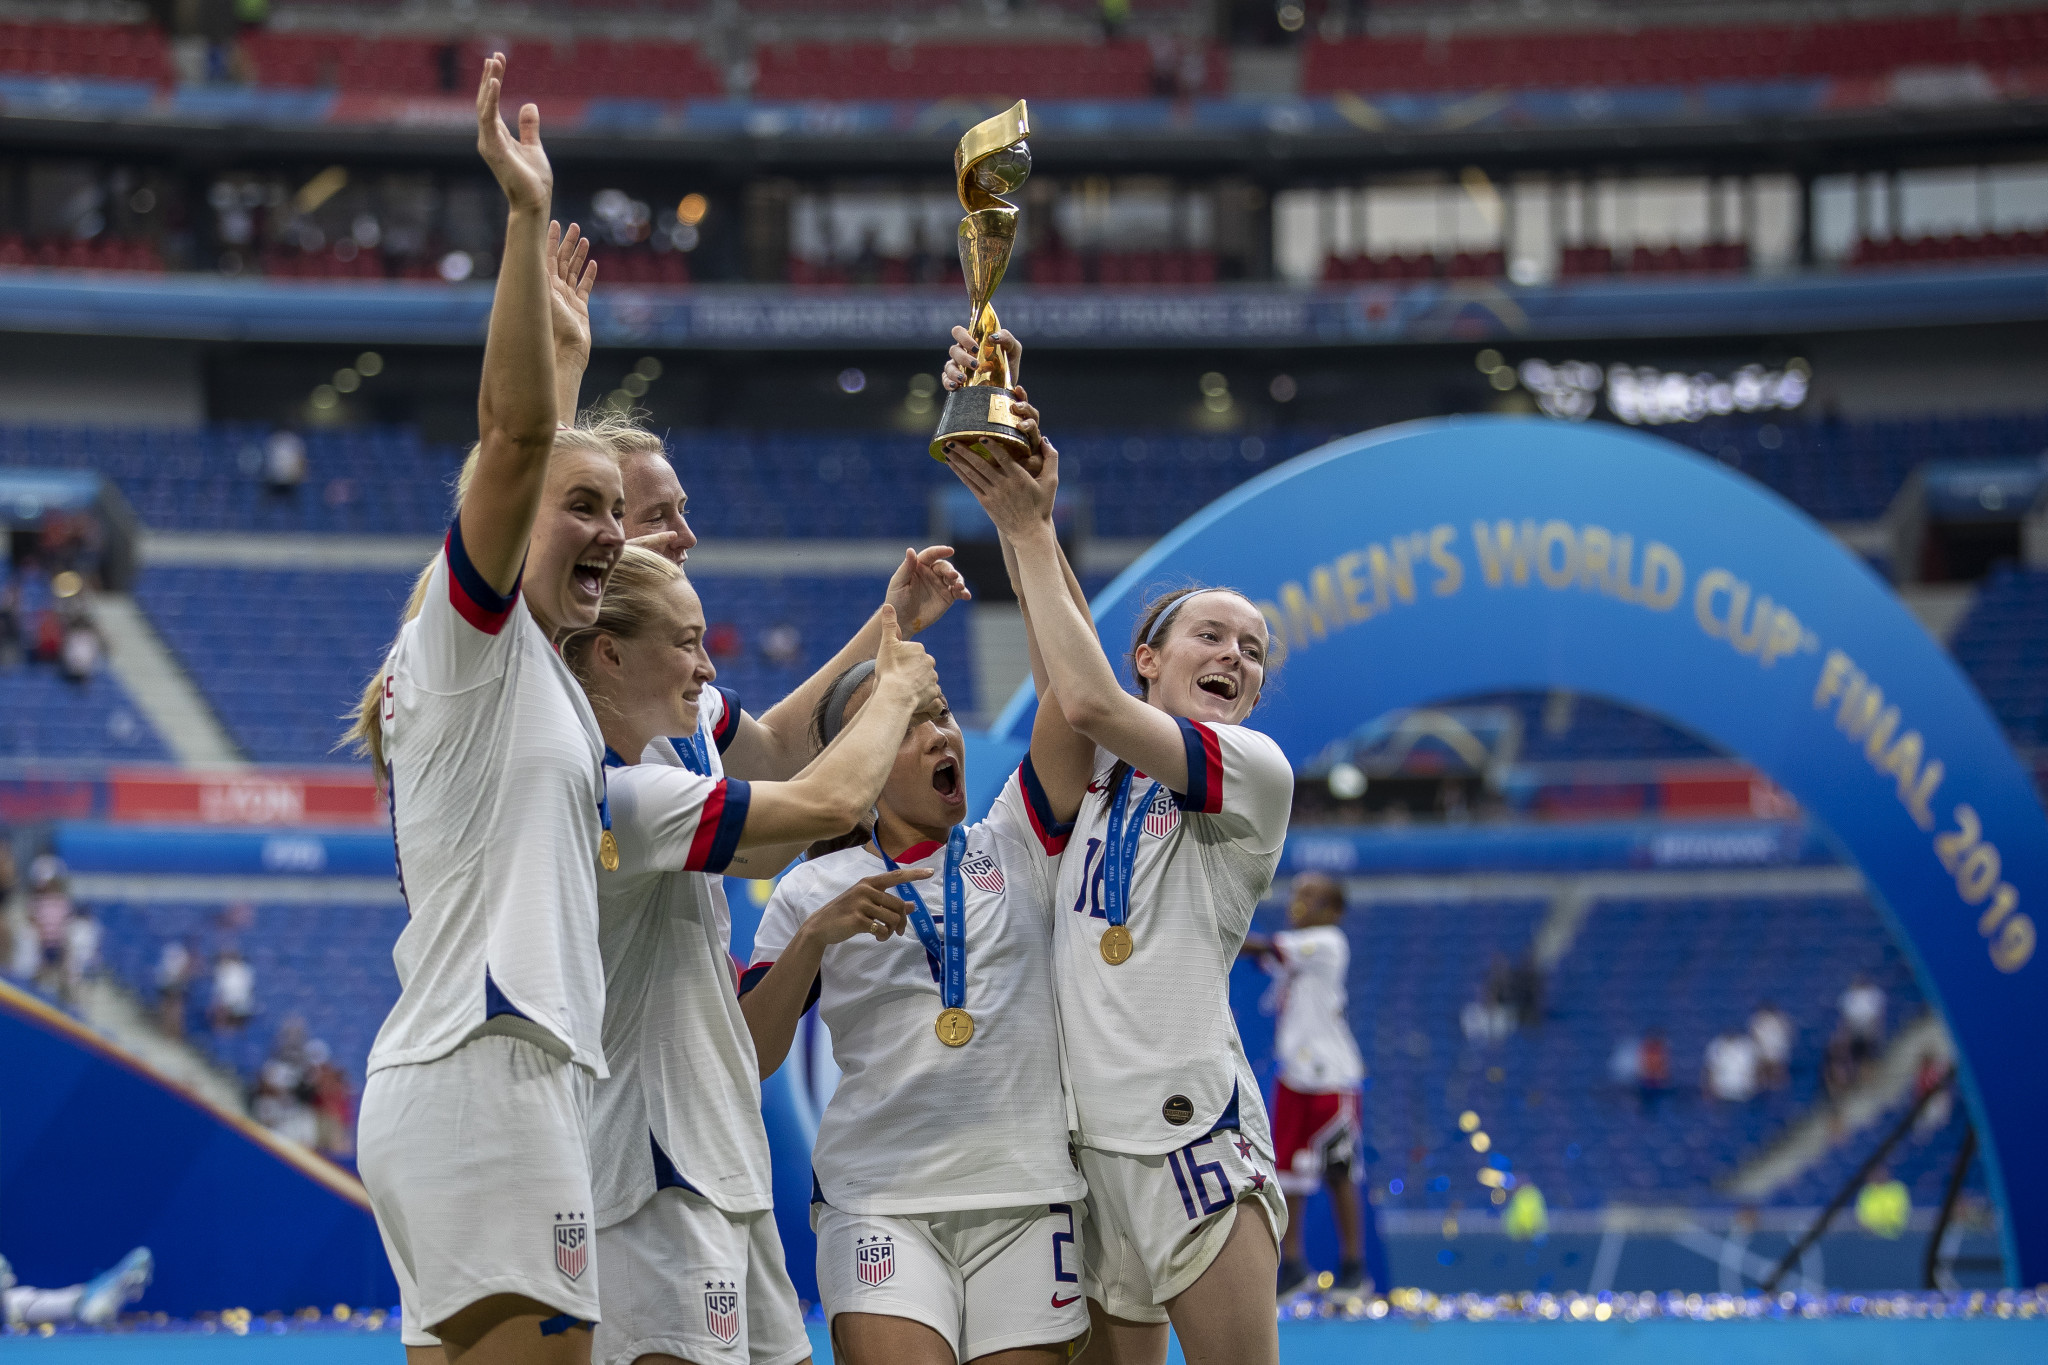 Brands could specifically associate themselves with tournaments such as the FIFA Women's World Cup under this restructured sponsorship offer ©Getty Images 